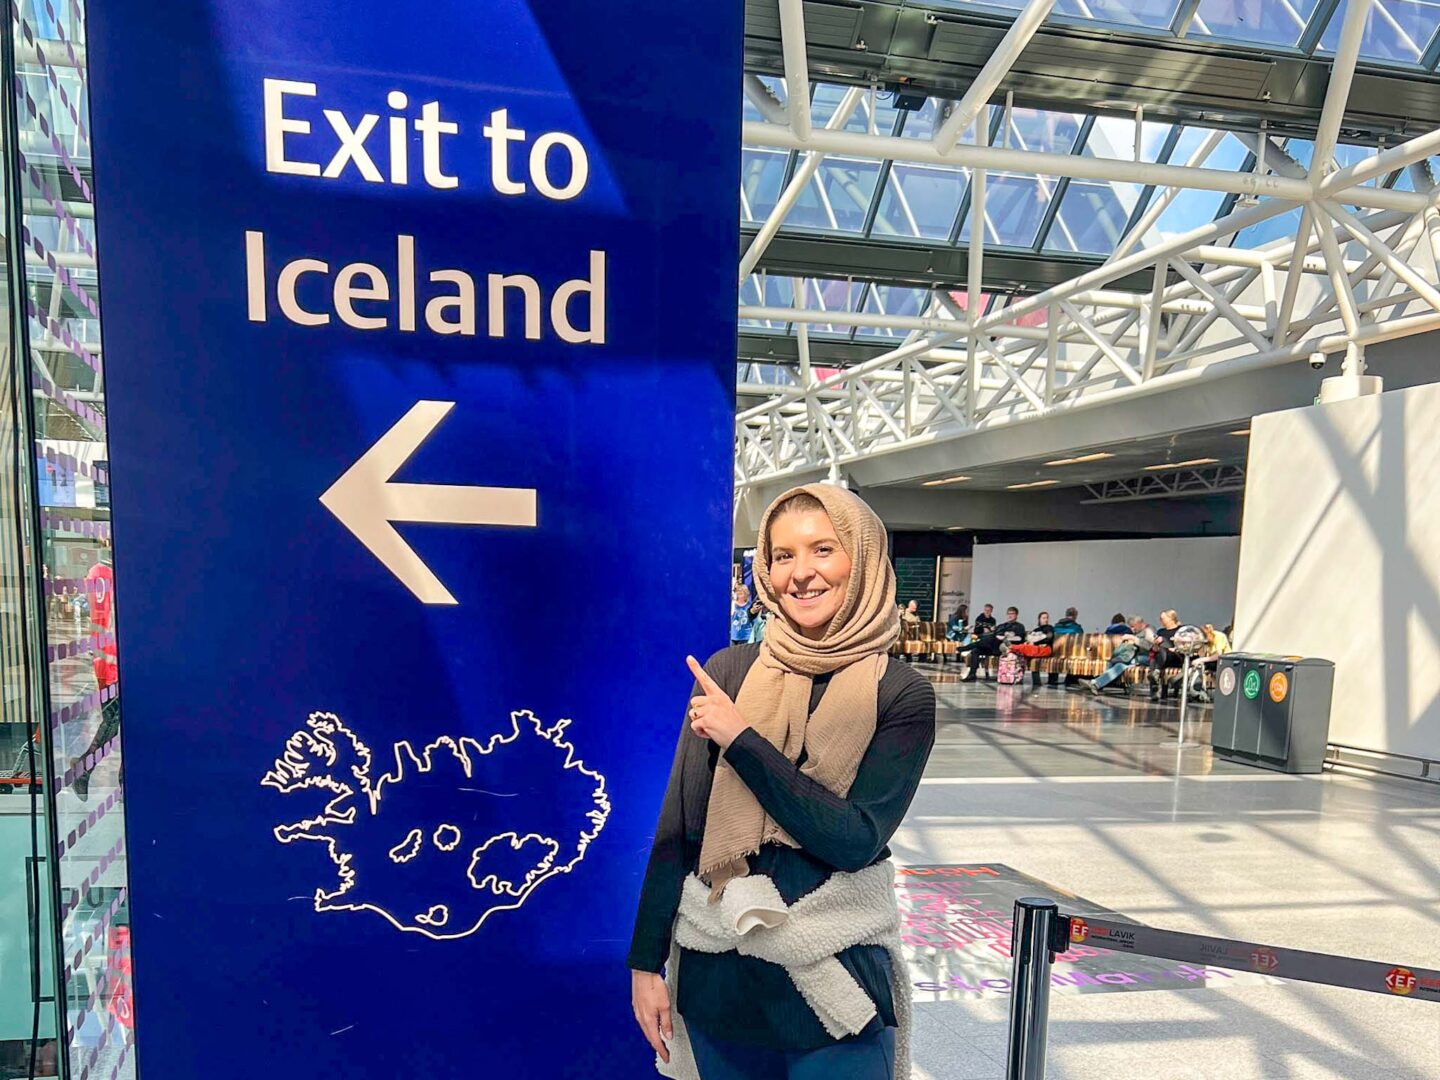 Iceland in May and June, Ellie at the exit to iceland sign